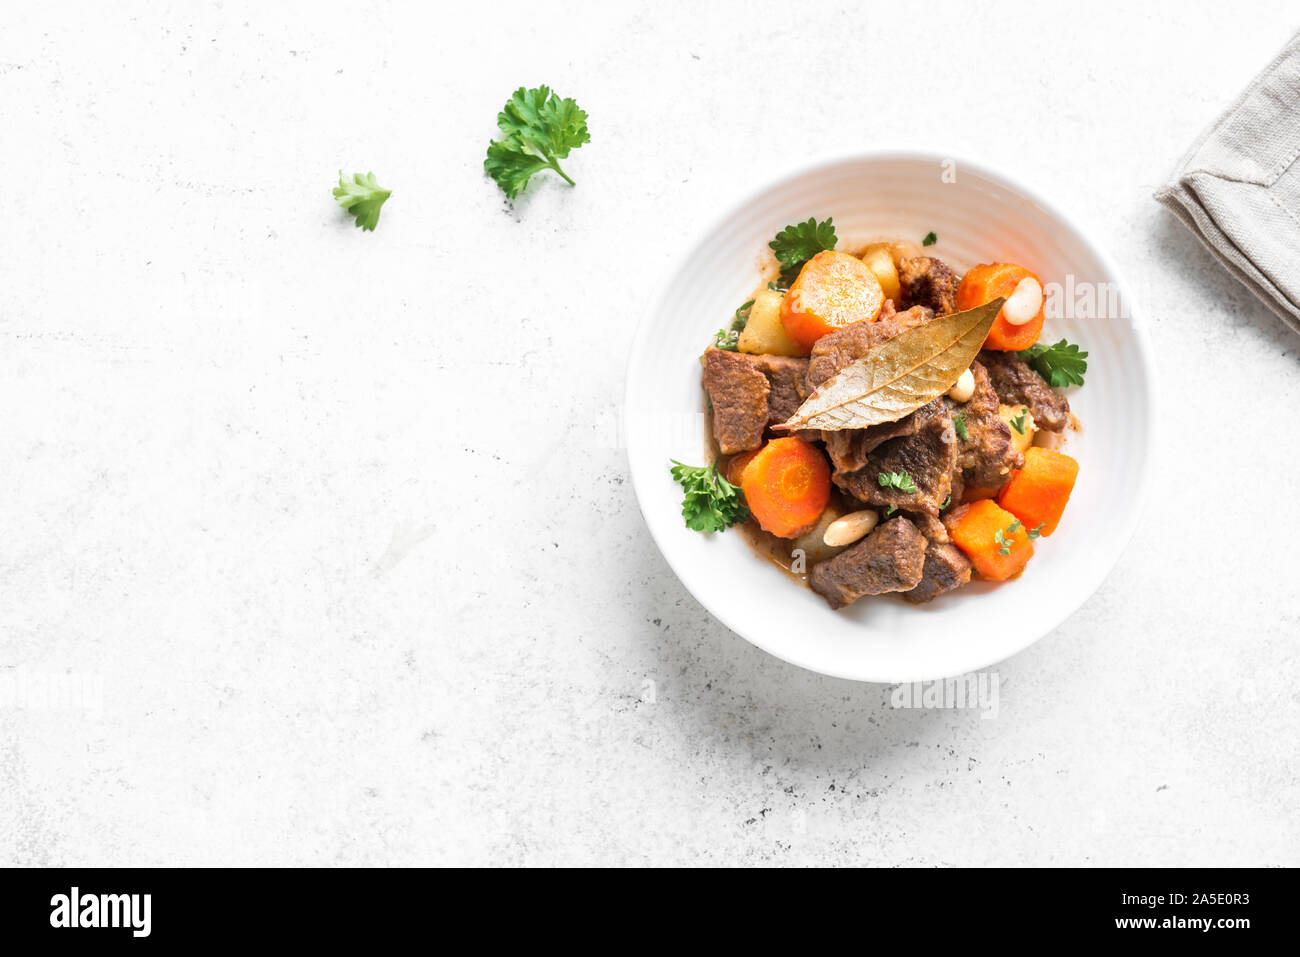 Beef meat stewed with potatoes, carrots and spices on white background, top view, copy space. Homemade winter comfort food - slow cooked meat stew. Stock Photo